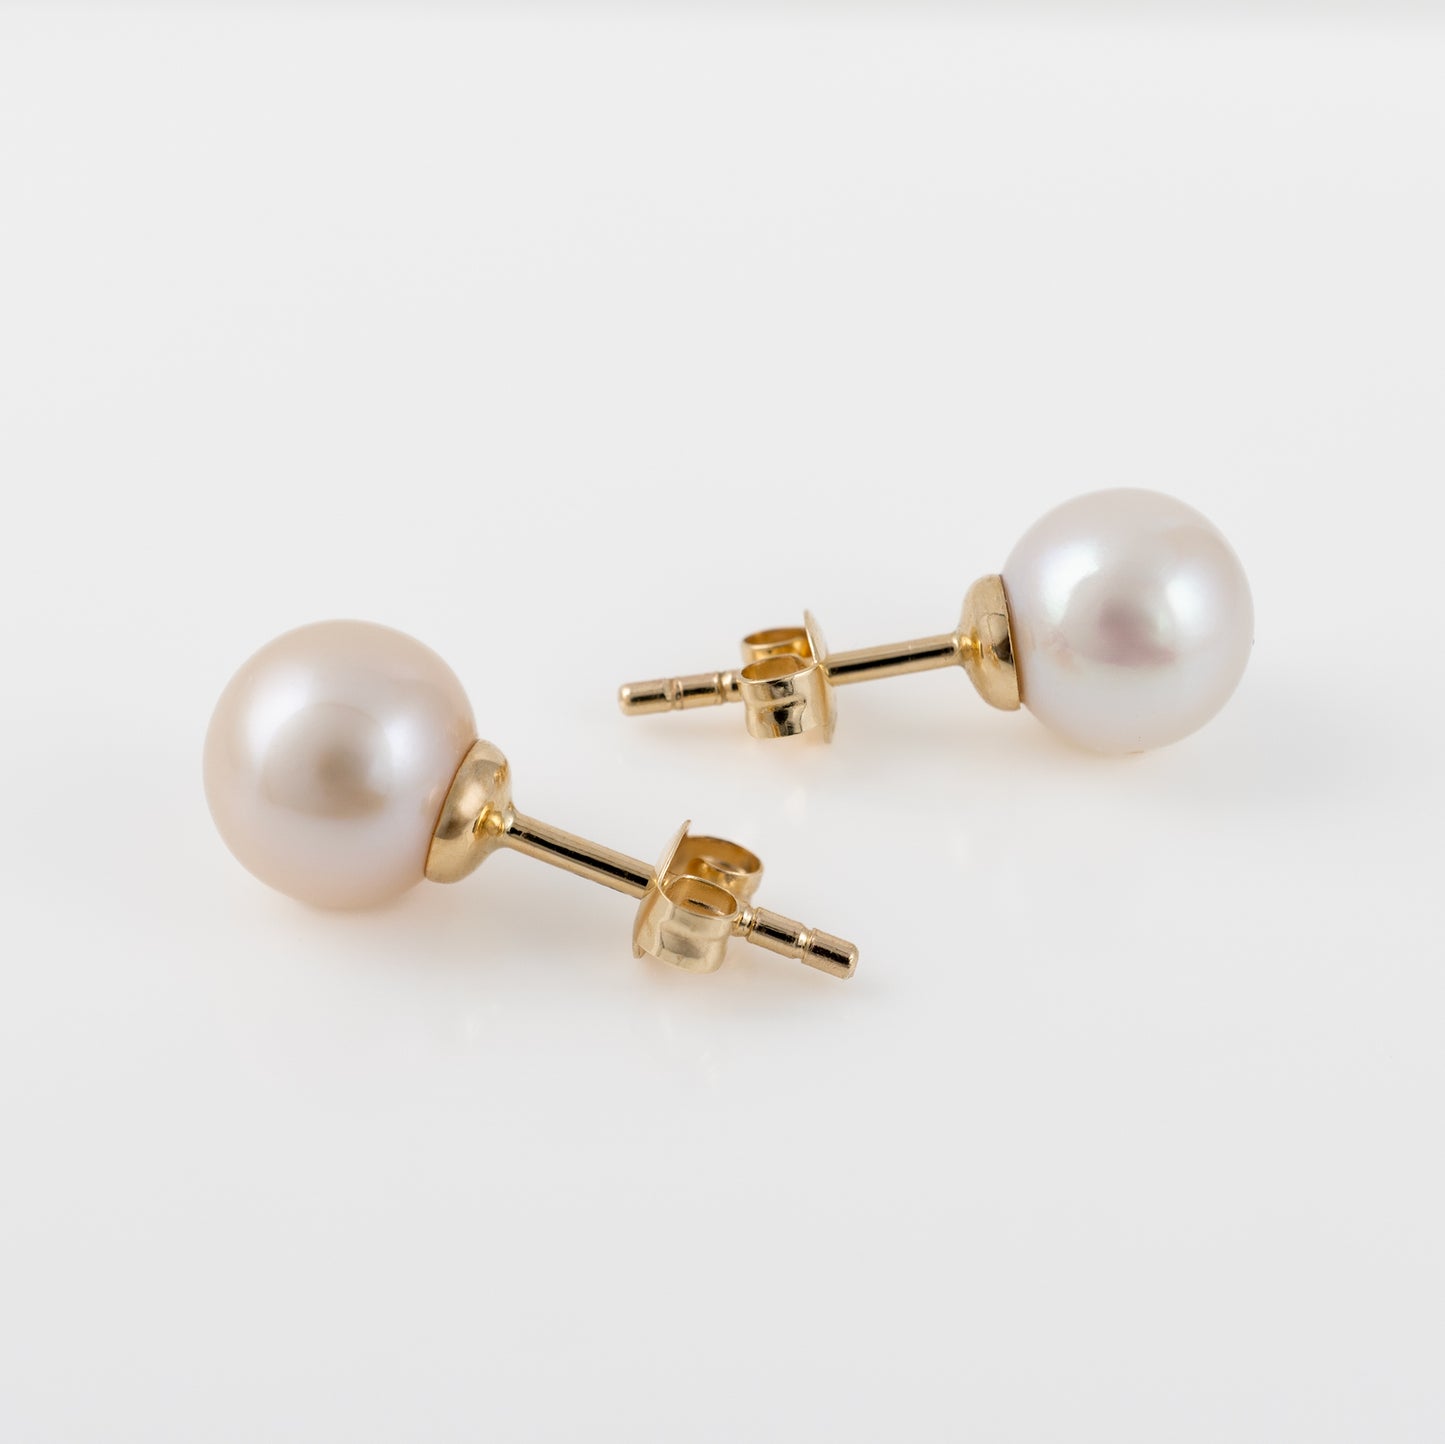 Freshwater Pearl Stud Earrings - 9ct Yellow Gold Assay Hallmarked